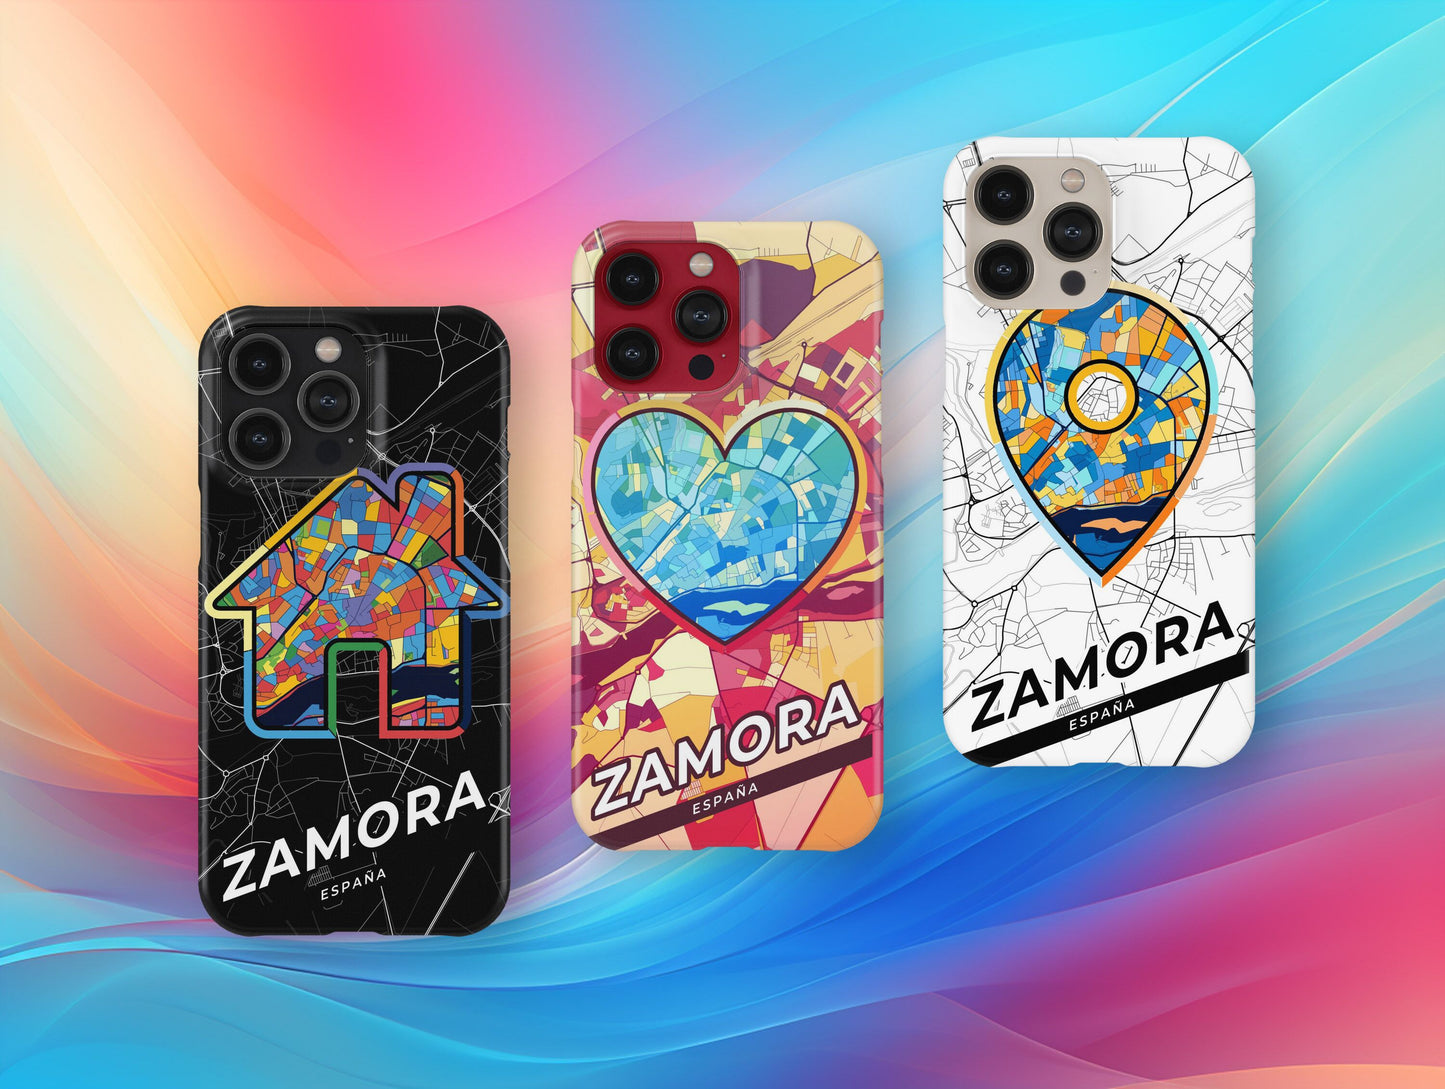 Zamora Spain slim phone case with colorful icon